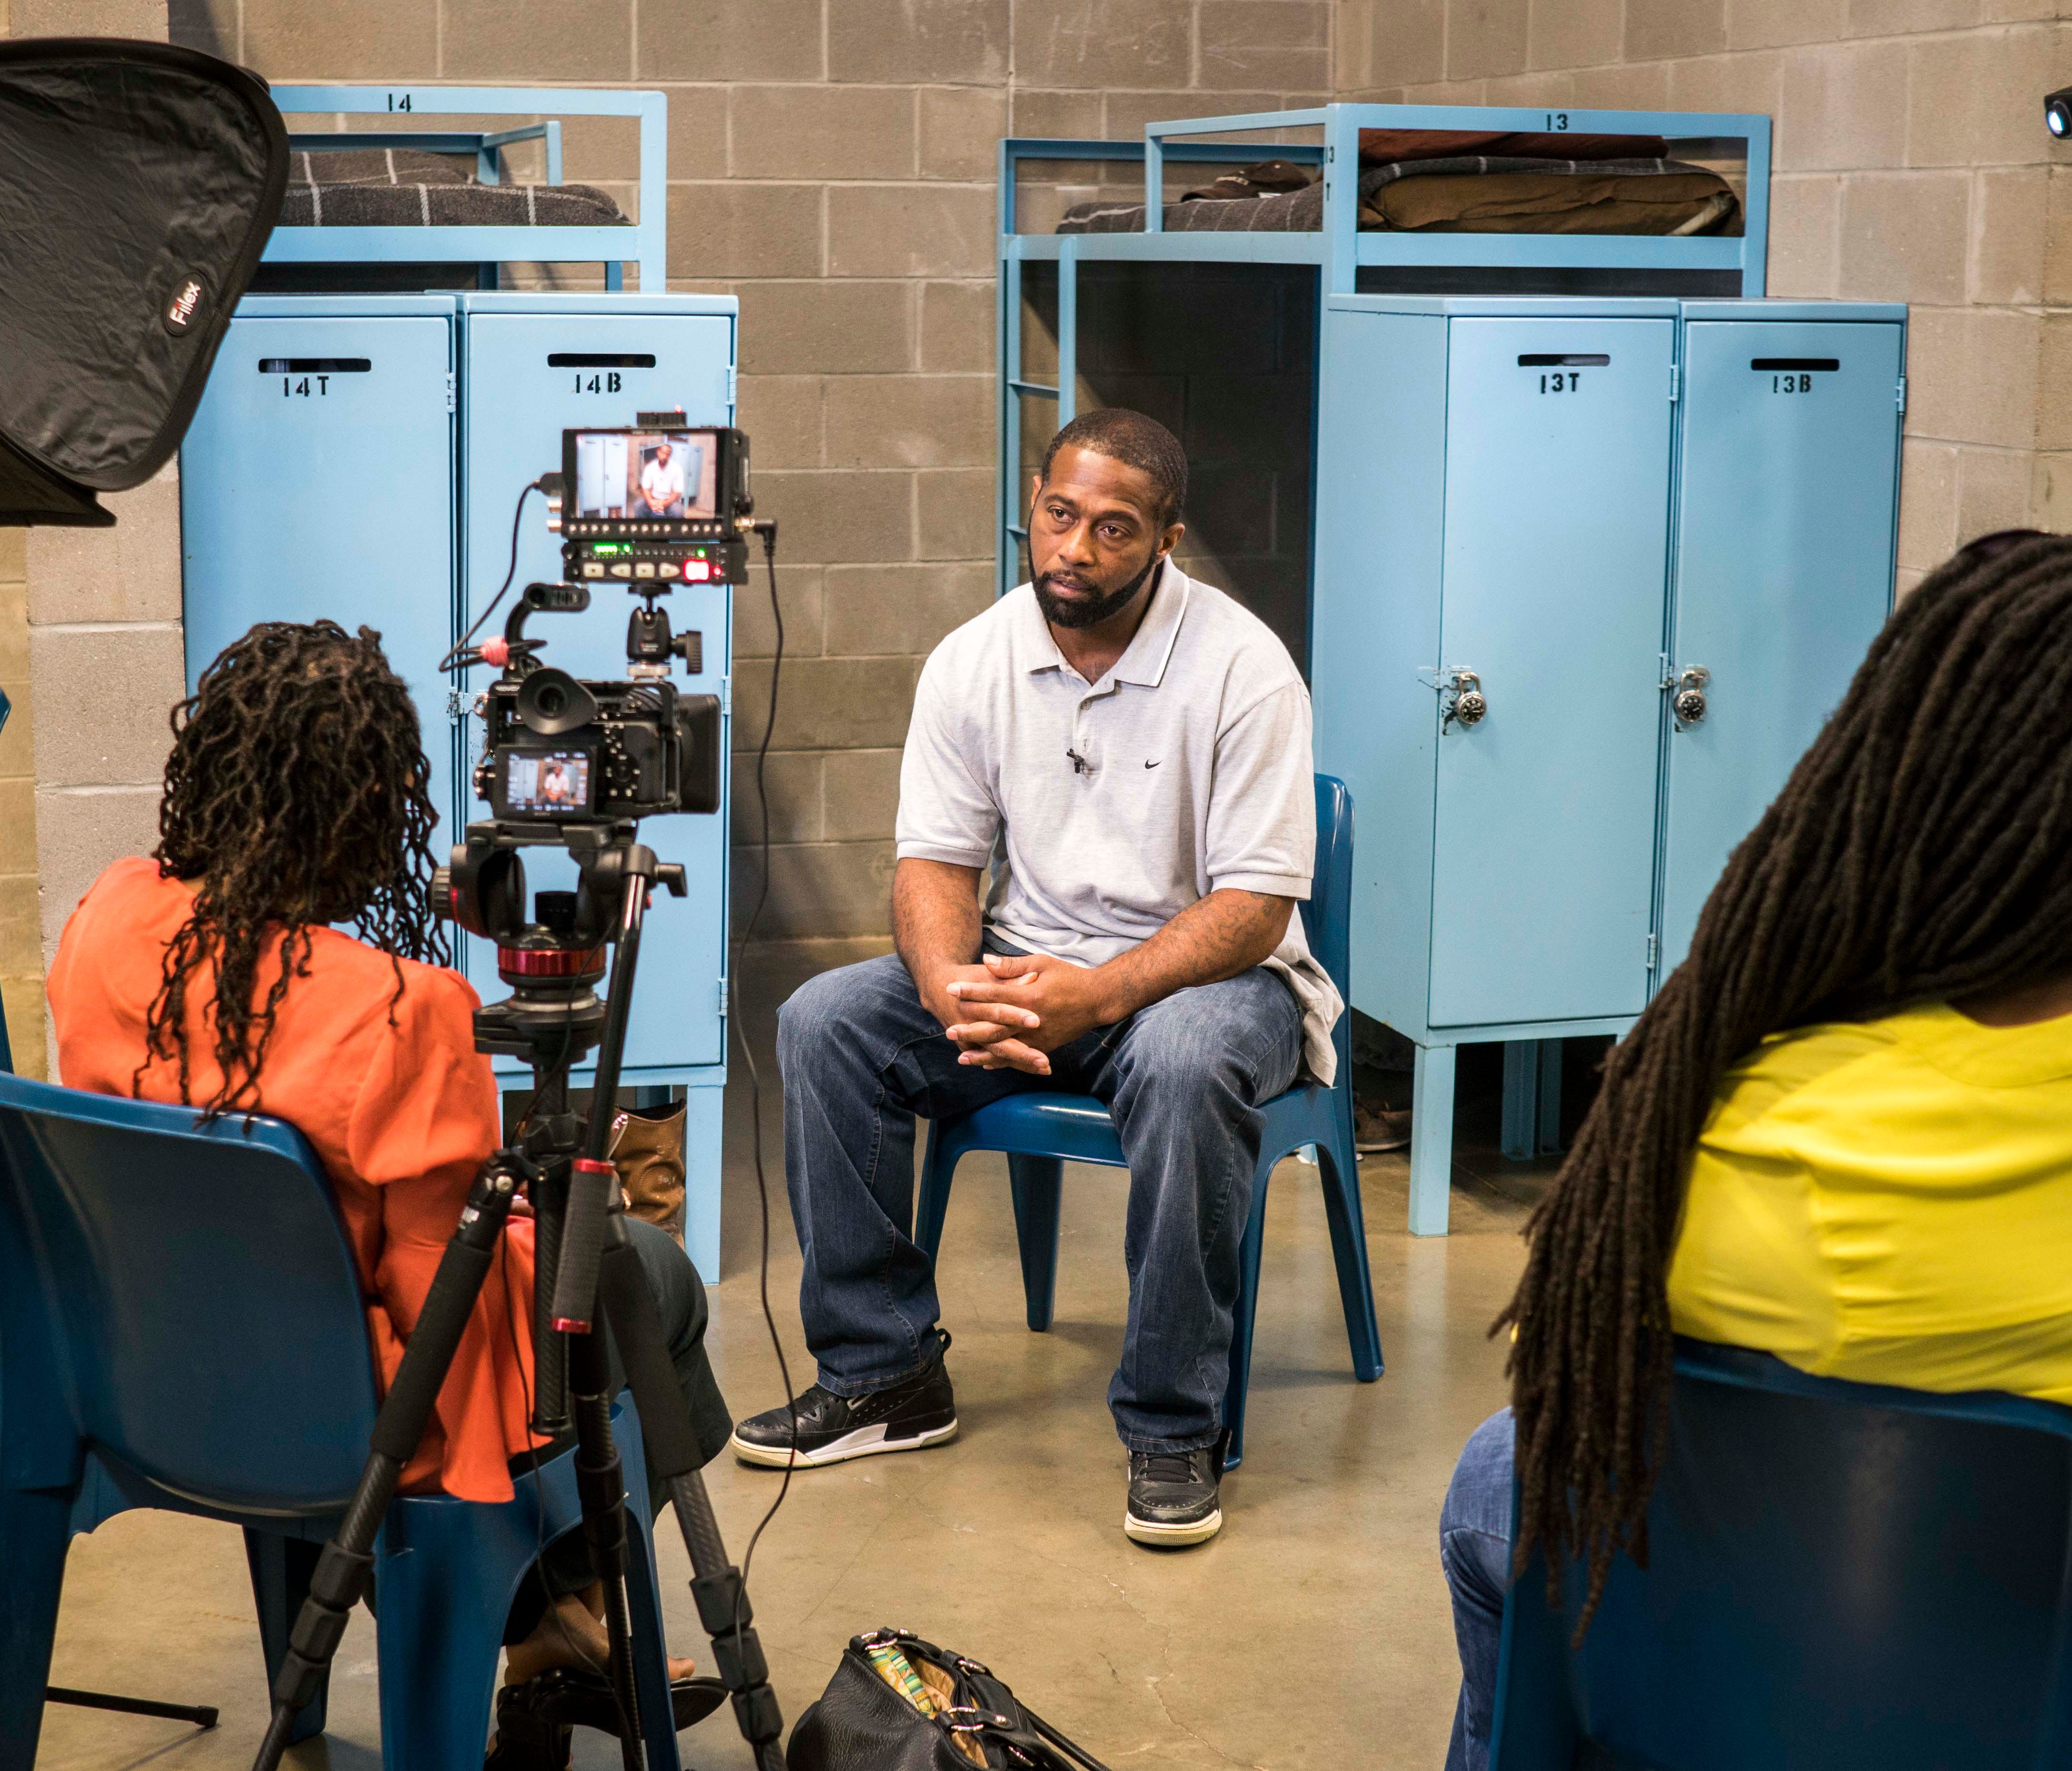 Harold Sylvester speaks with USA TODAY about the re-entry program at Lafayette Parrish prison in Louisiana.